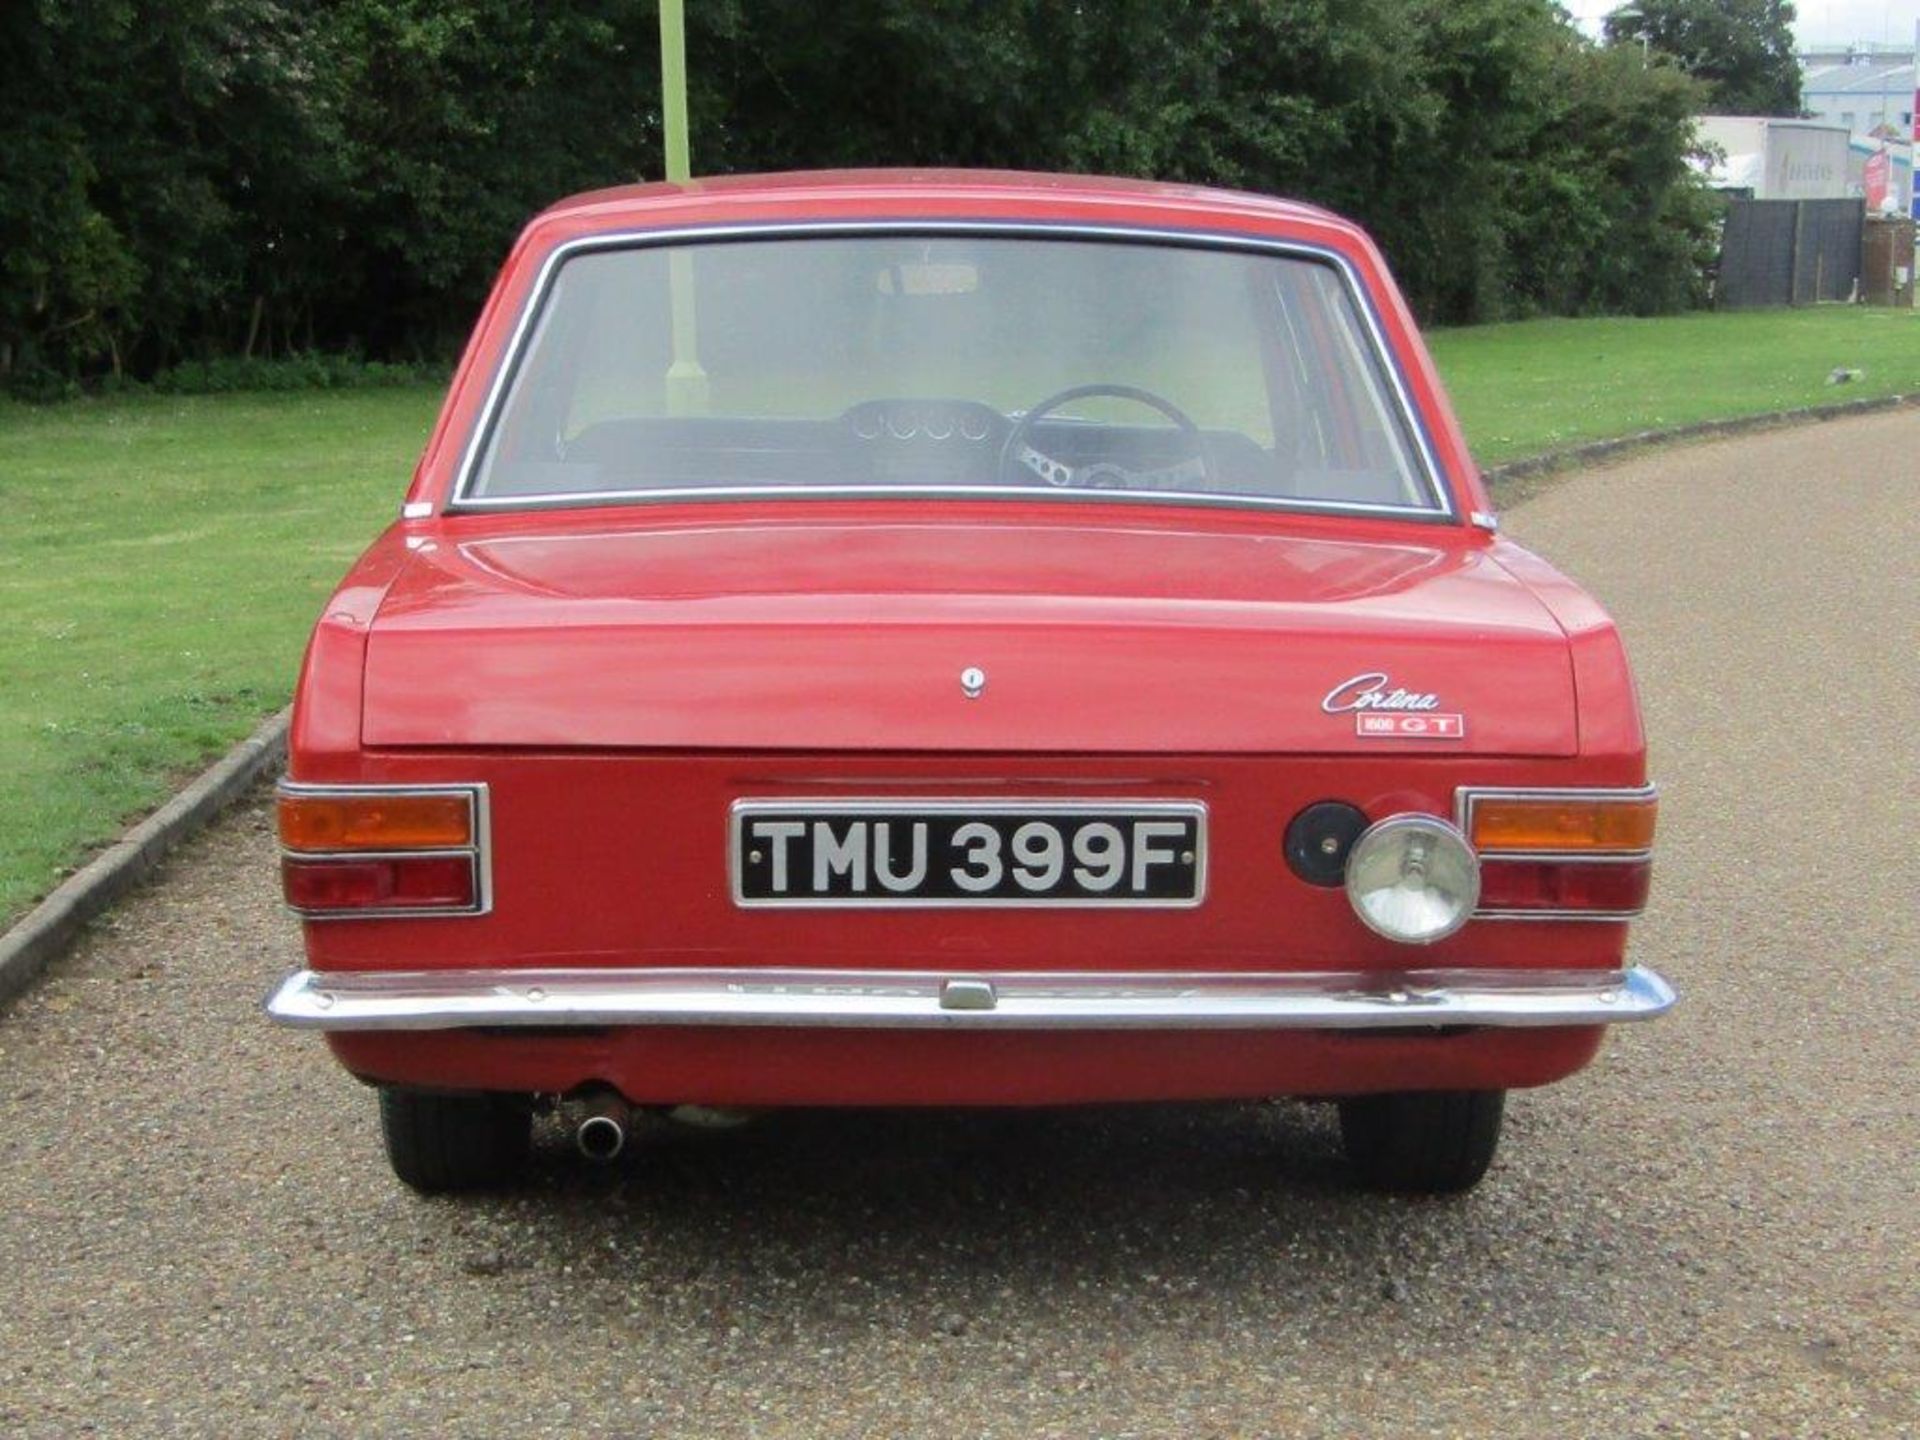 1968 Ford Cortina 1600 GT MKII - Image 5 of 11